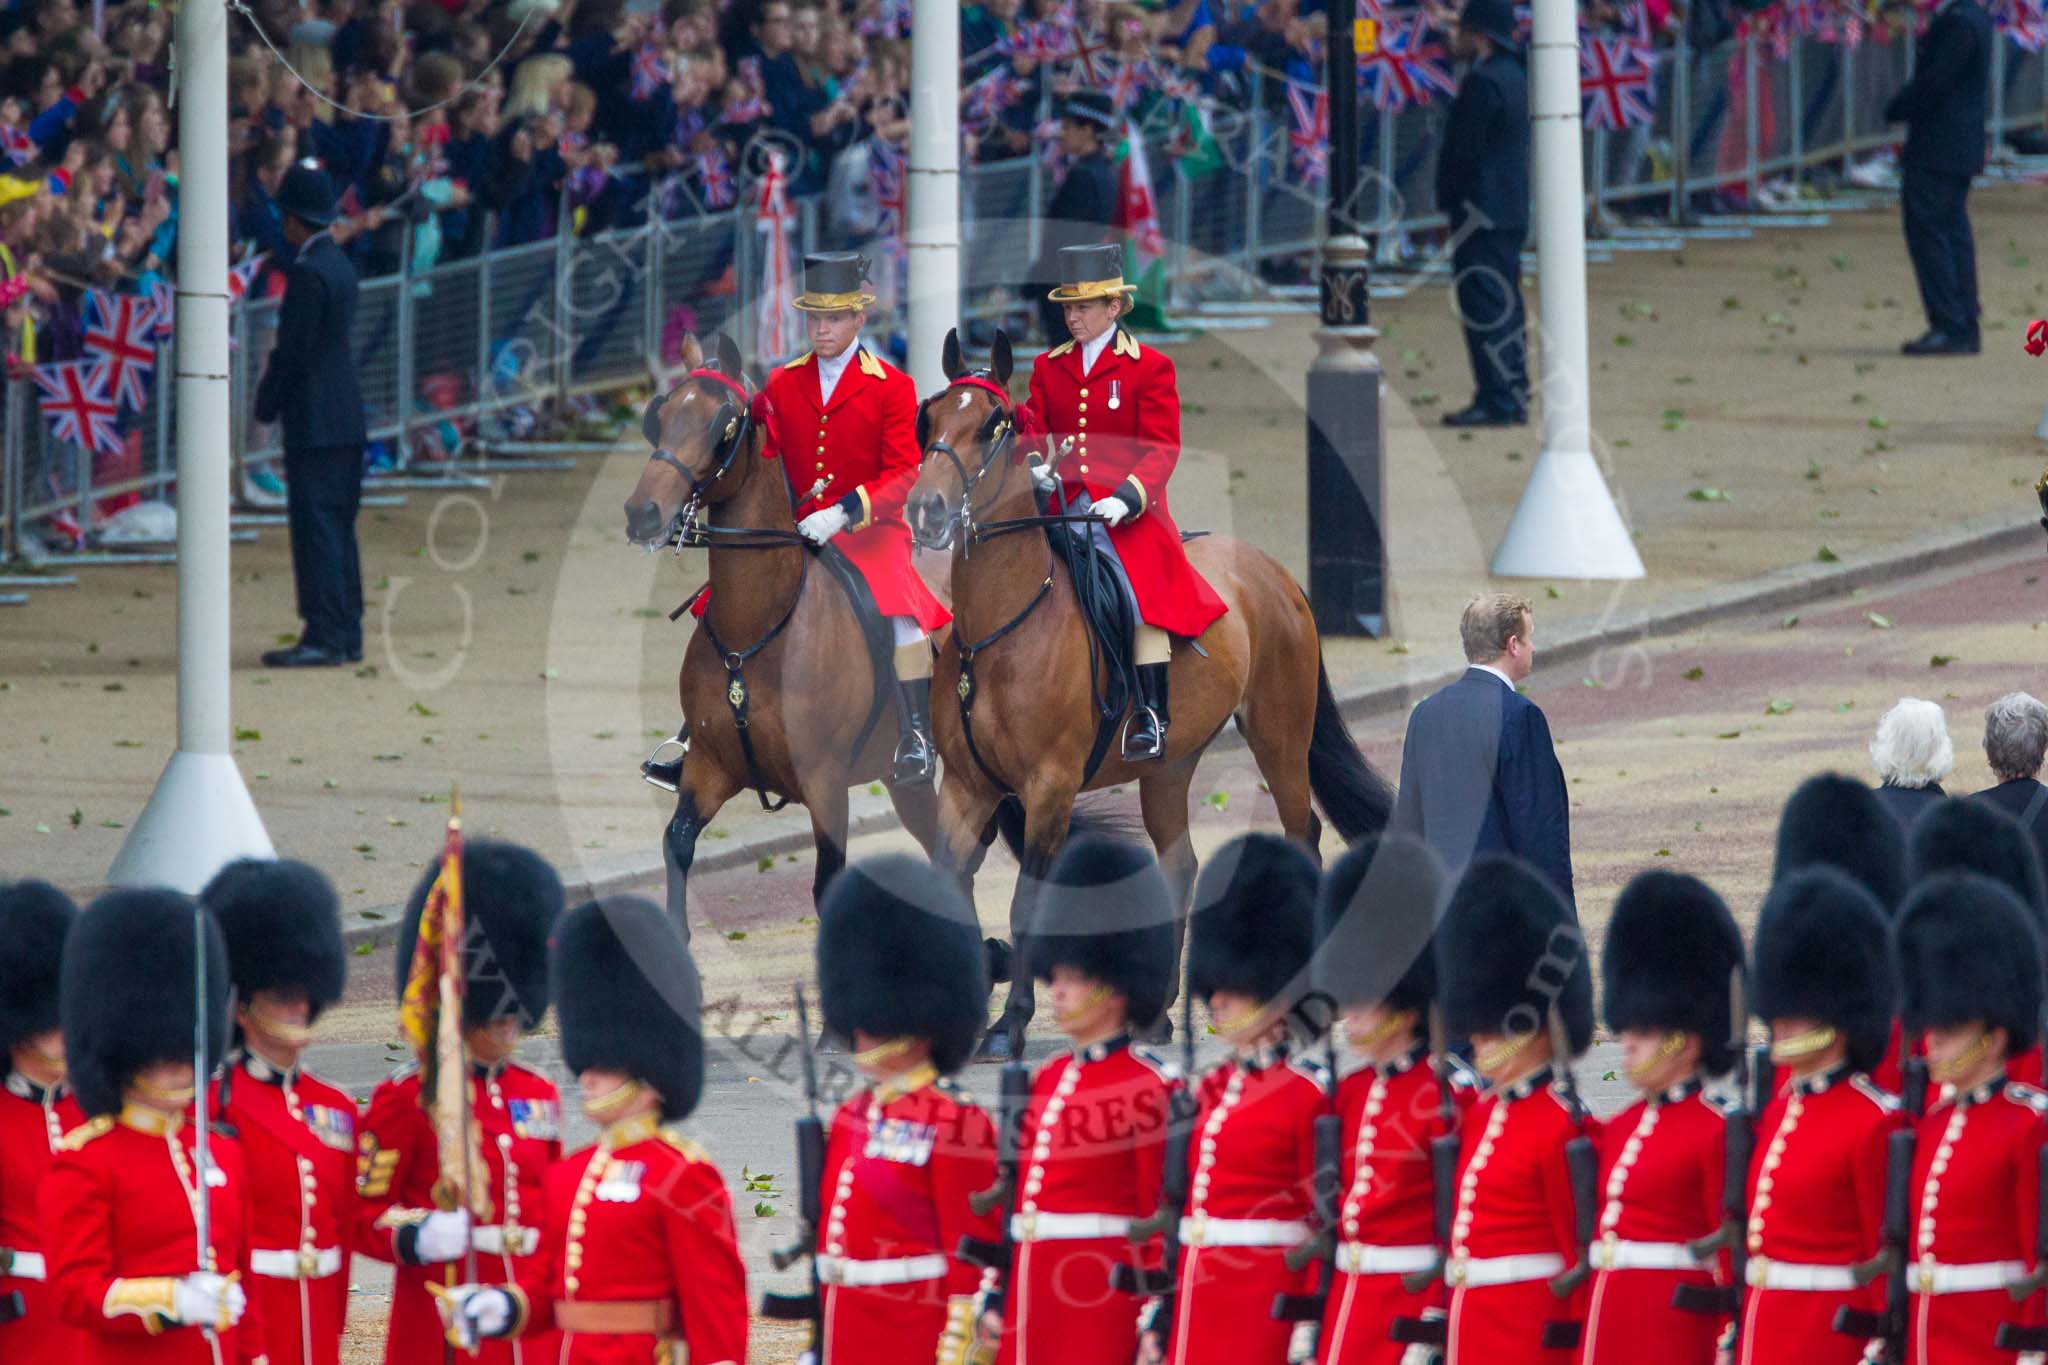 Trooping the Colour 2015. Image #173, 13 June 2015 10:49 Horse Guards Parade, London, UK